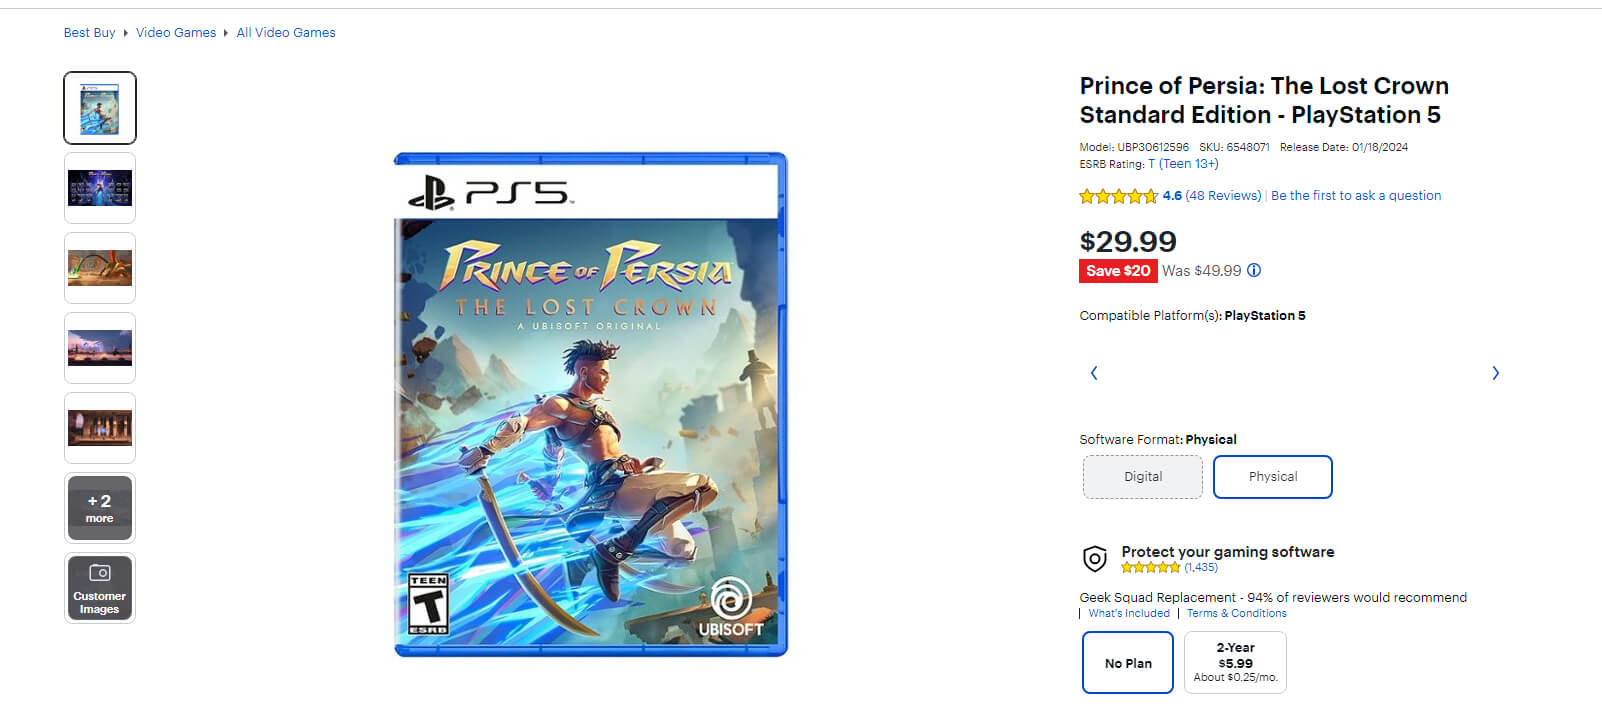 Prince of Persia: The Lost Crown on Best Buy at a Discounted Price